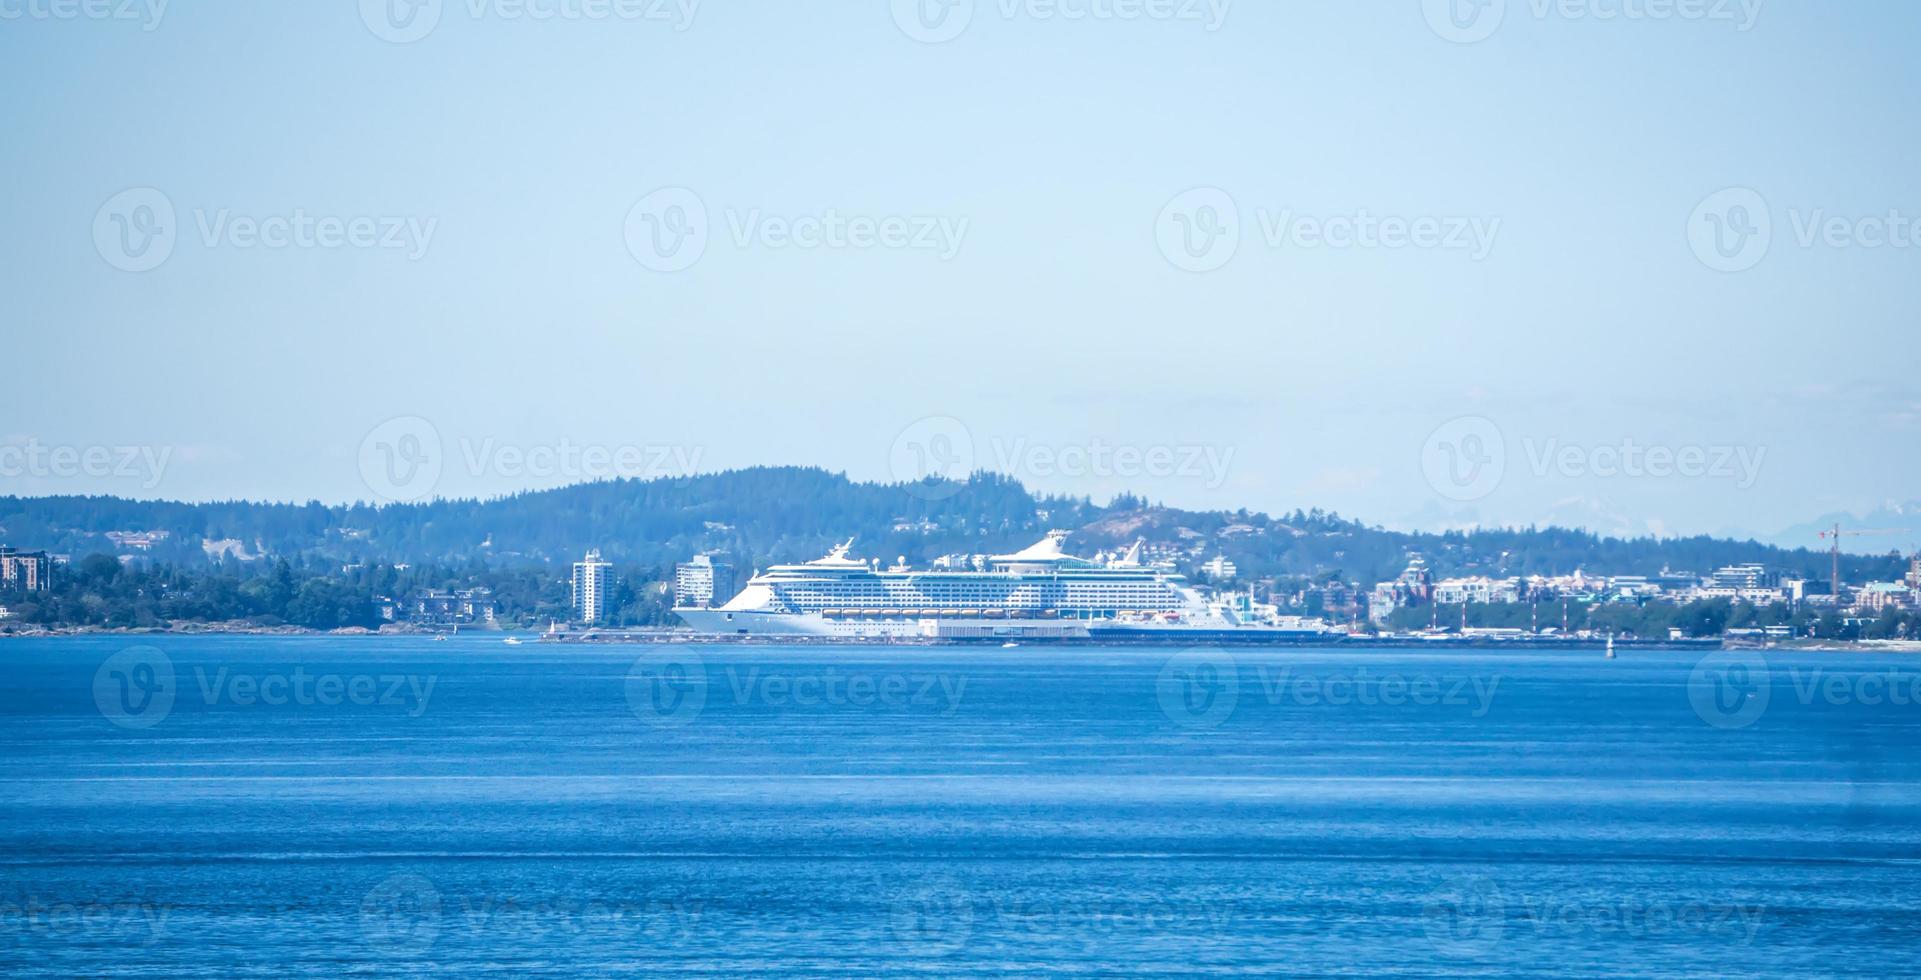 views from Ogden Point cruise ship terminal in Victoria BC.Canada photo